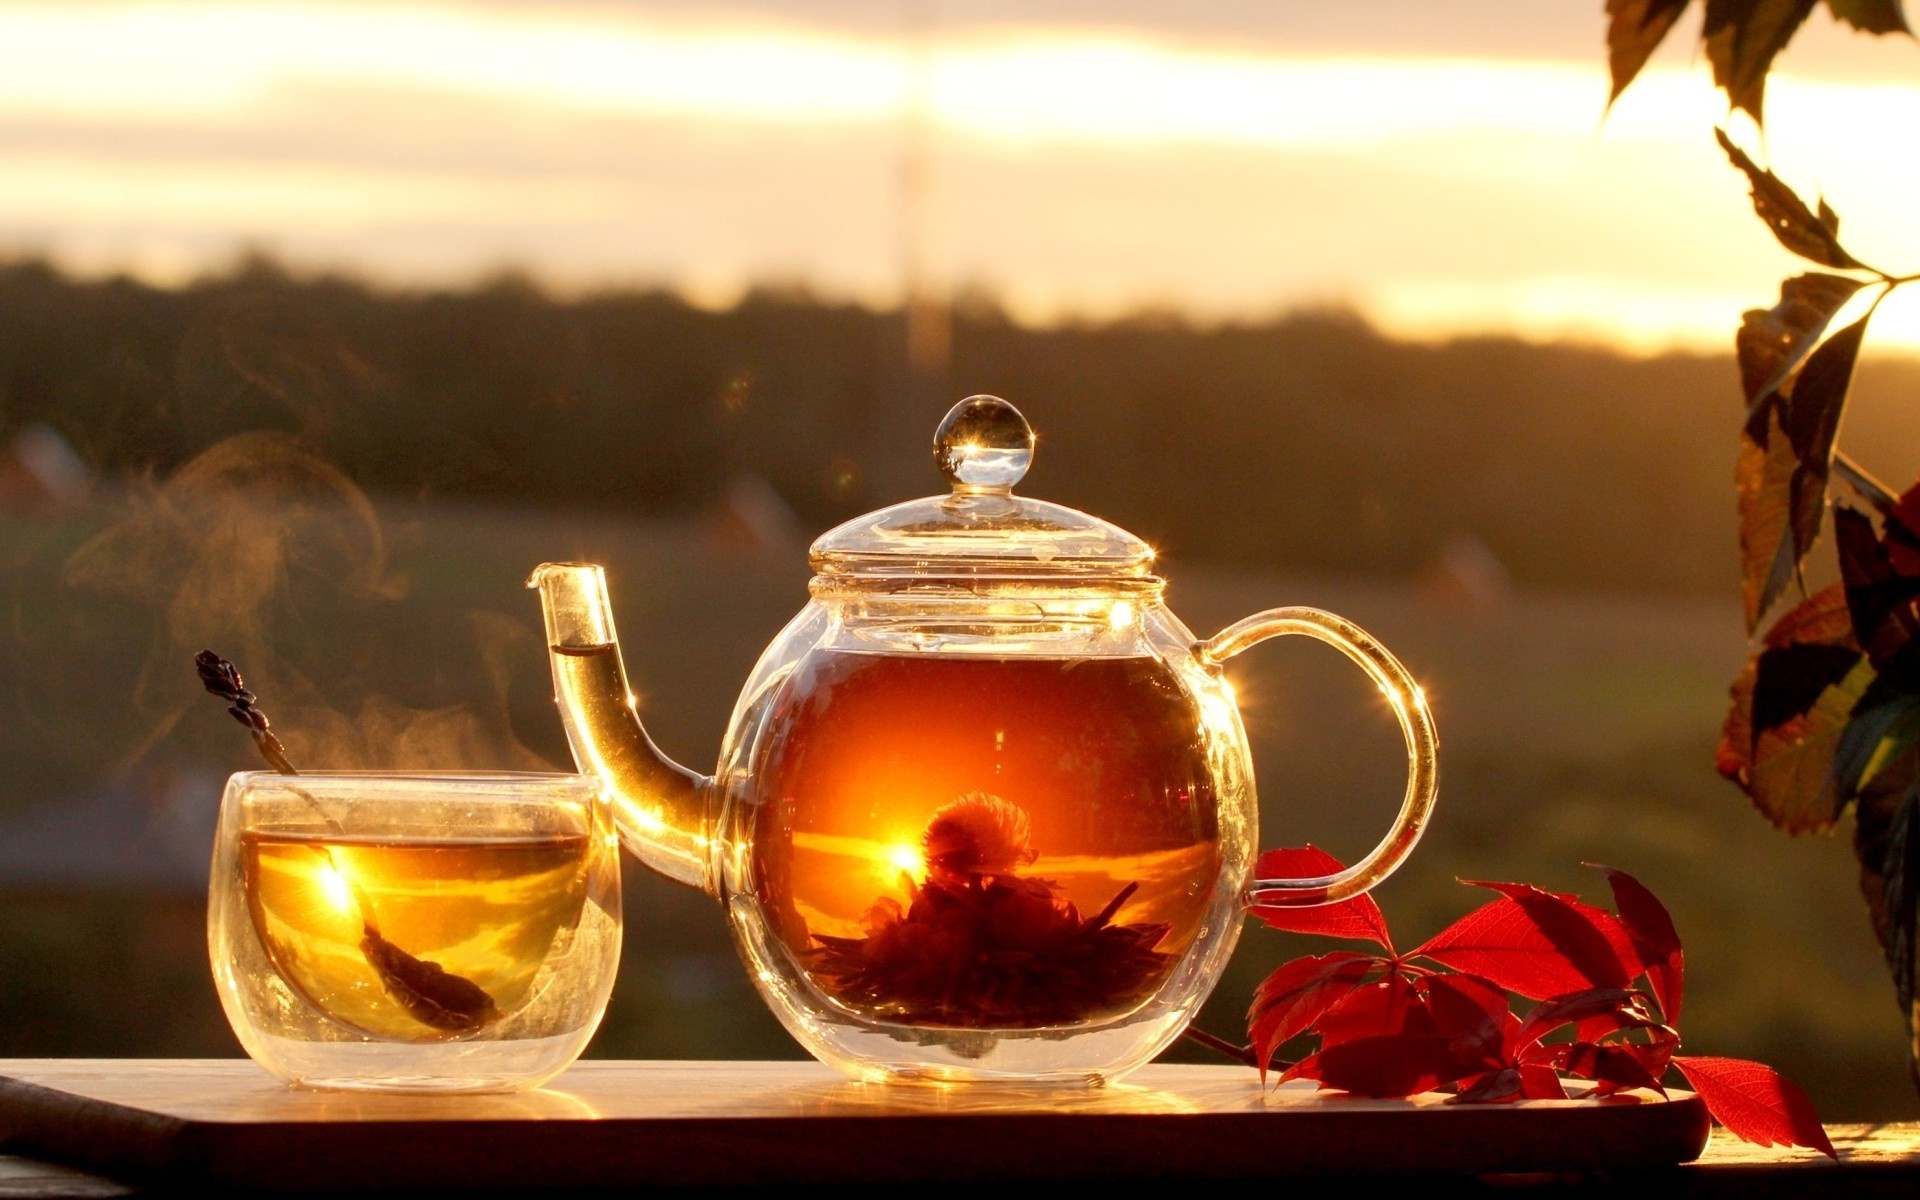 Free Tea In The Morning Food, Computer Desktop Wallpapers, - Good Morning  Sunny Day - 1920x1200 Wallpaper 